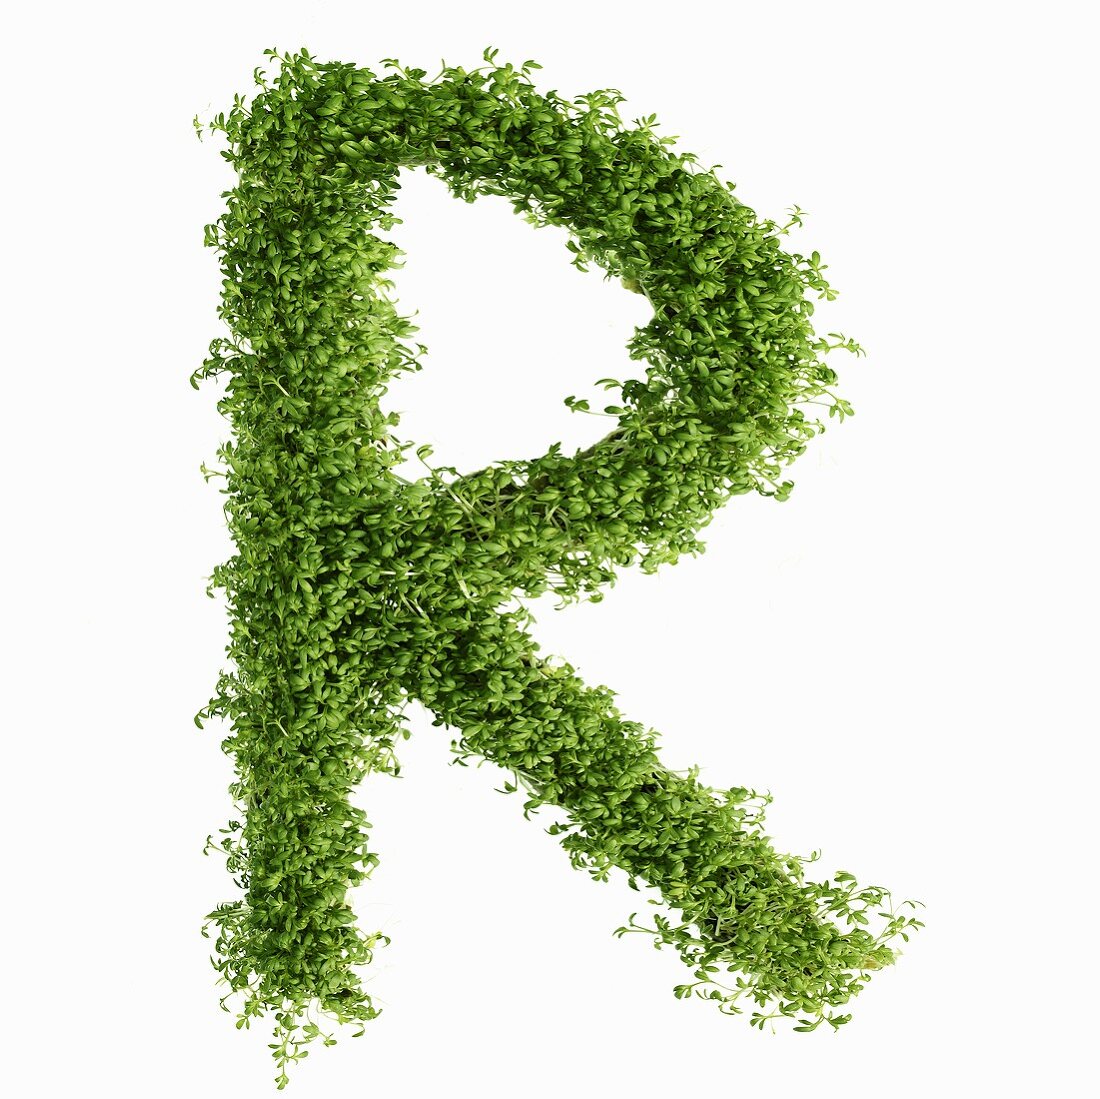 The letter R in cress